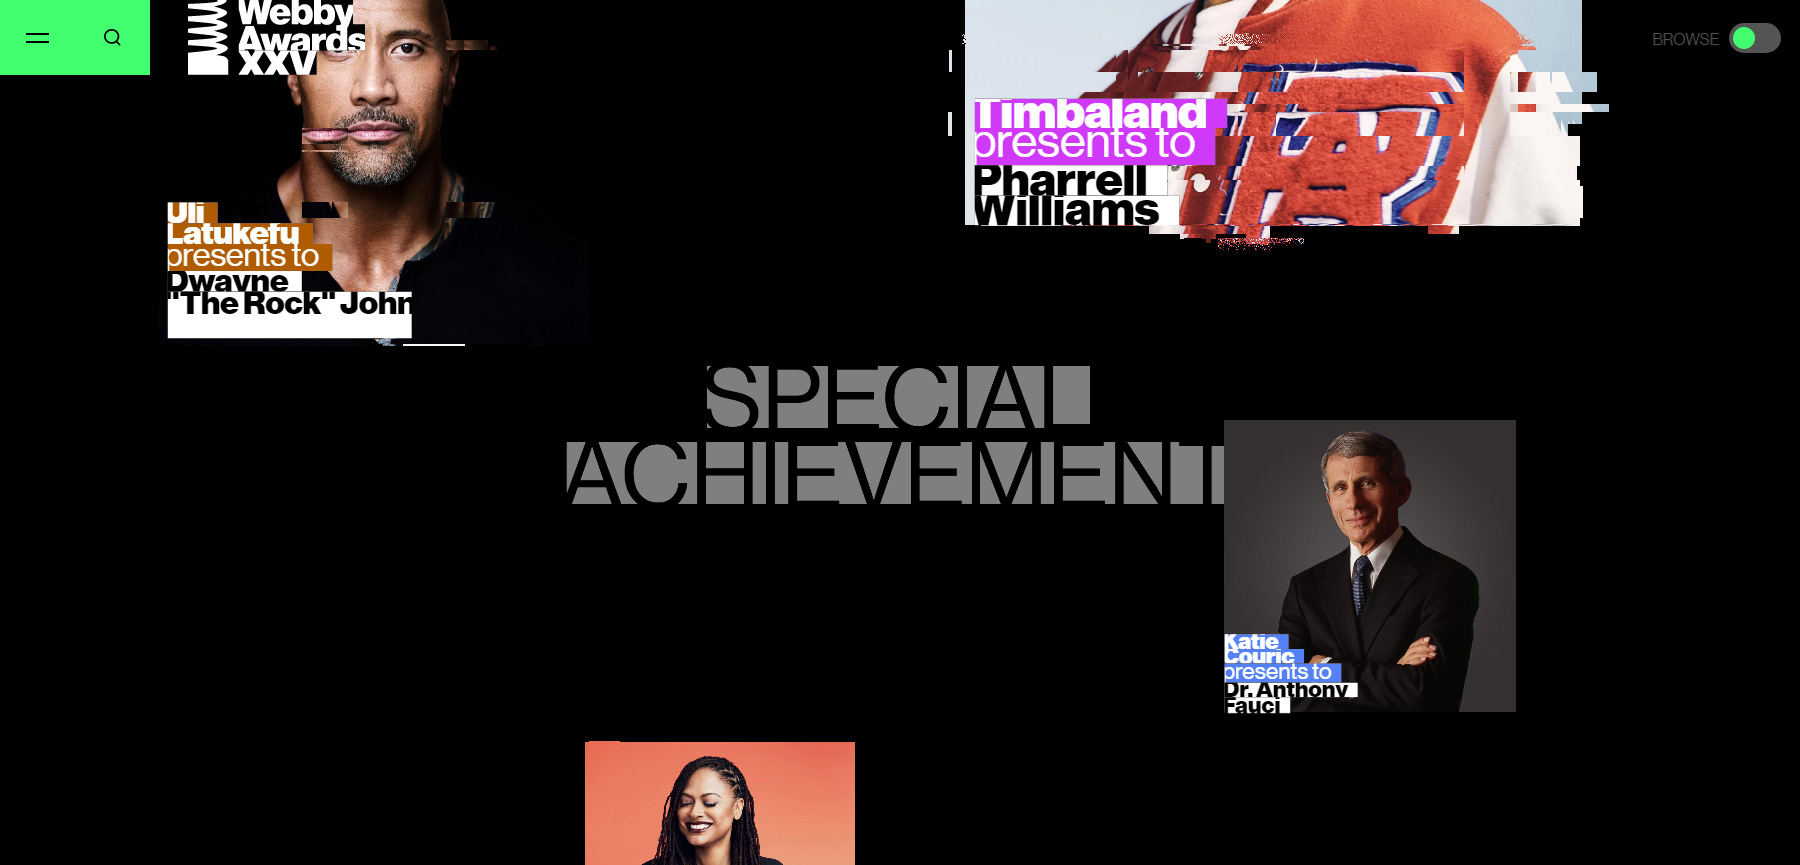 2021 Virtual Webbys - Website of the Day